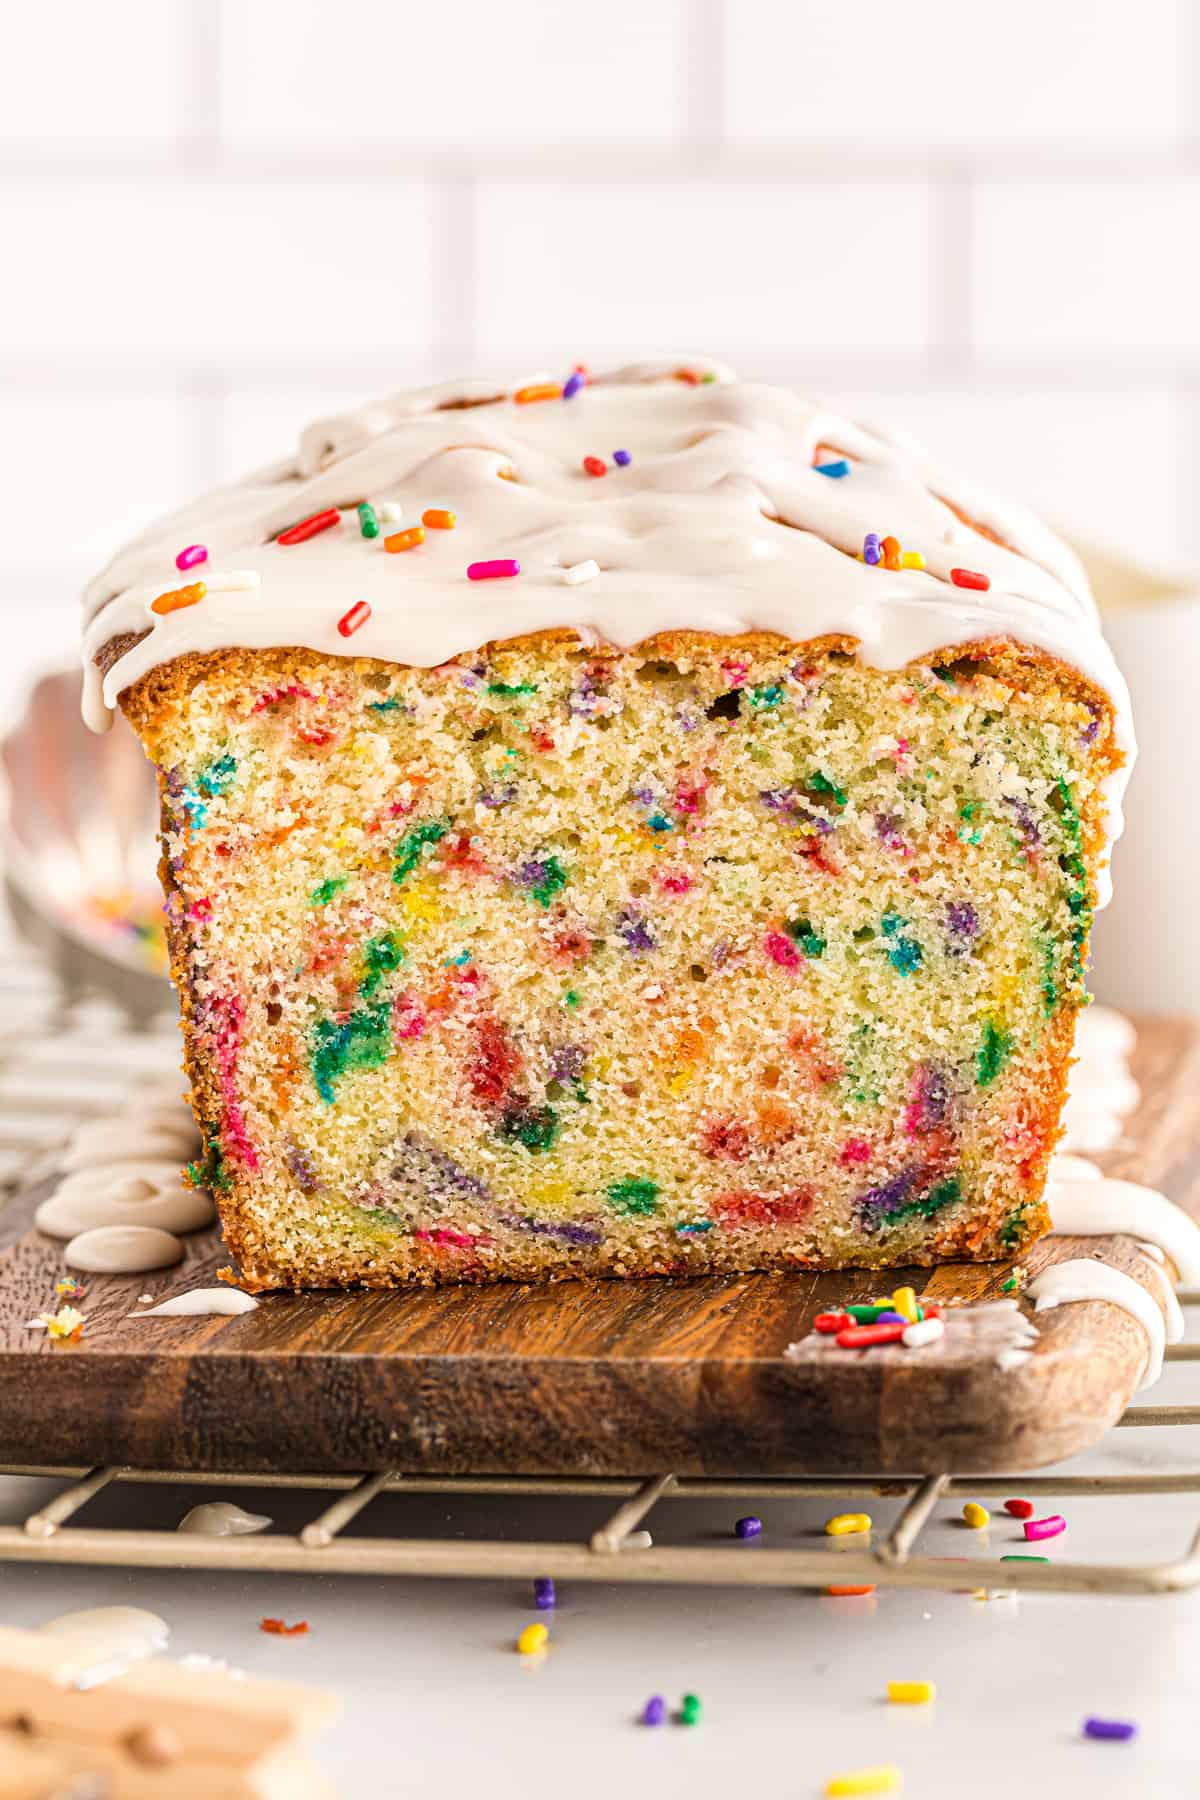 funfetti pound cake with glaze drizzled on top with a slice removed showing the inside texture